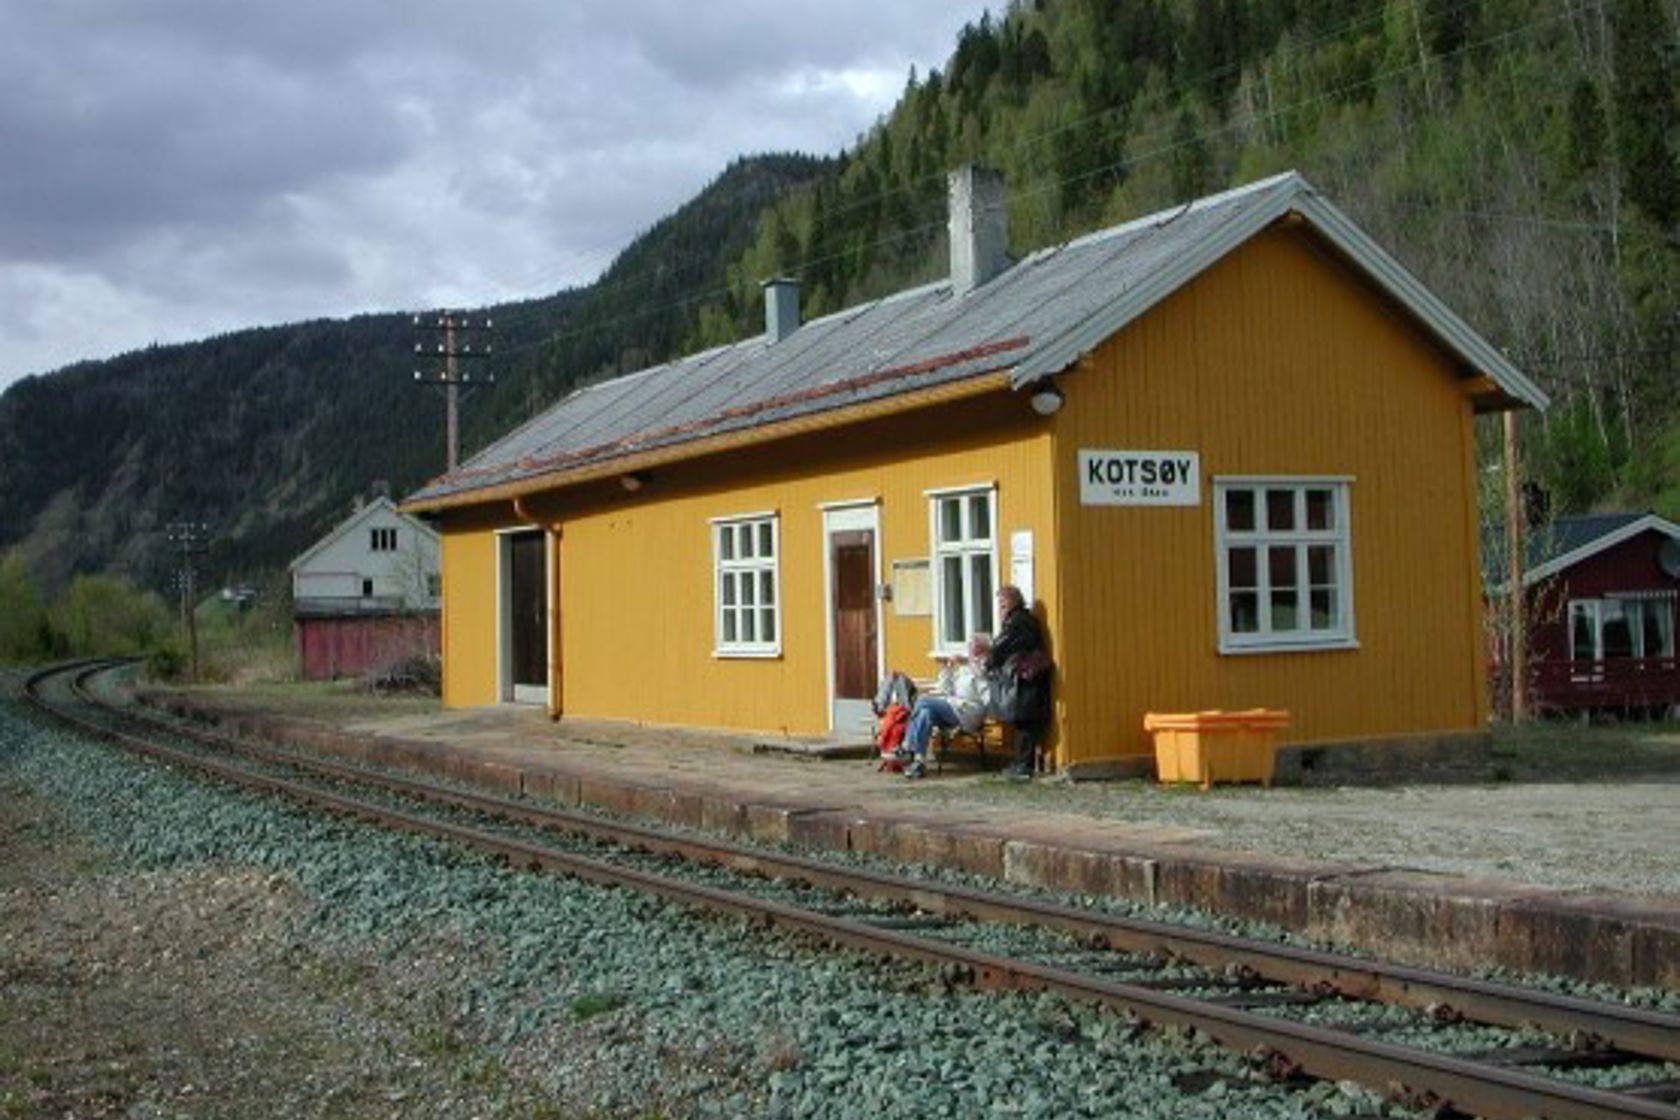 Exterior view of Kotsøy station